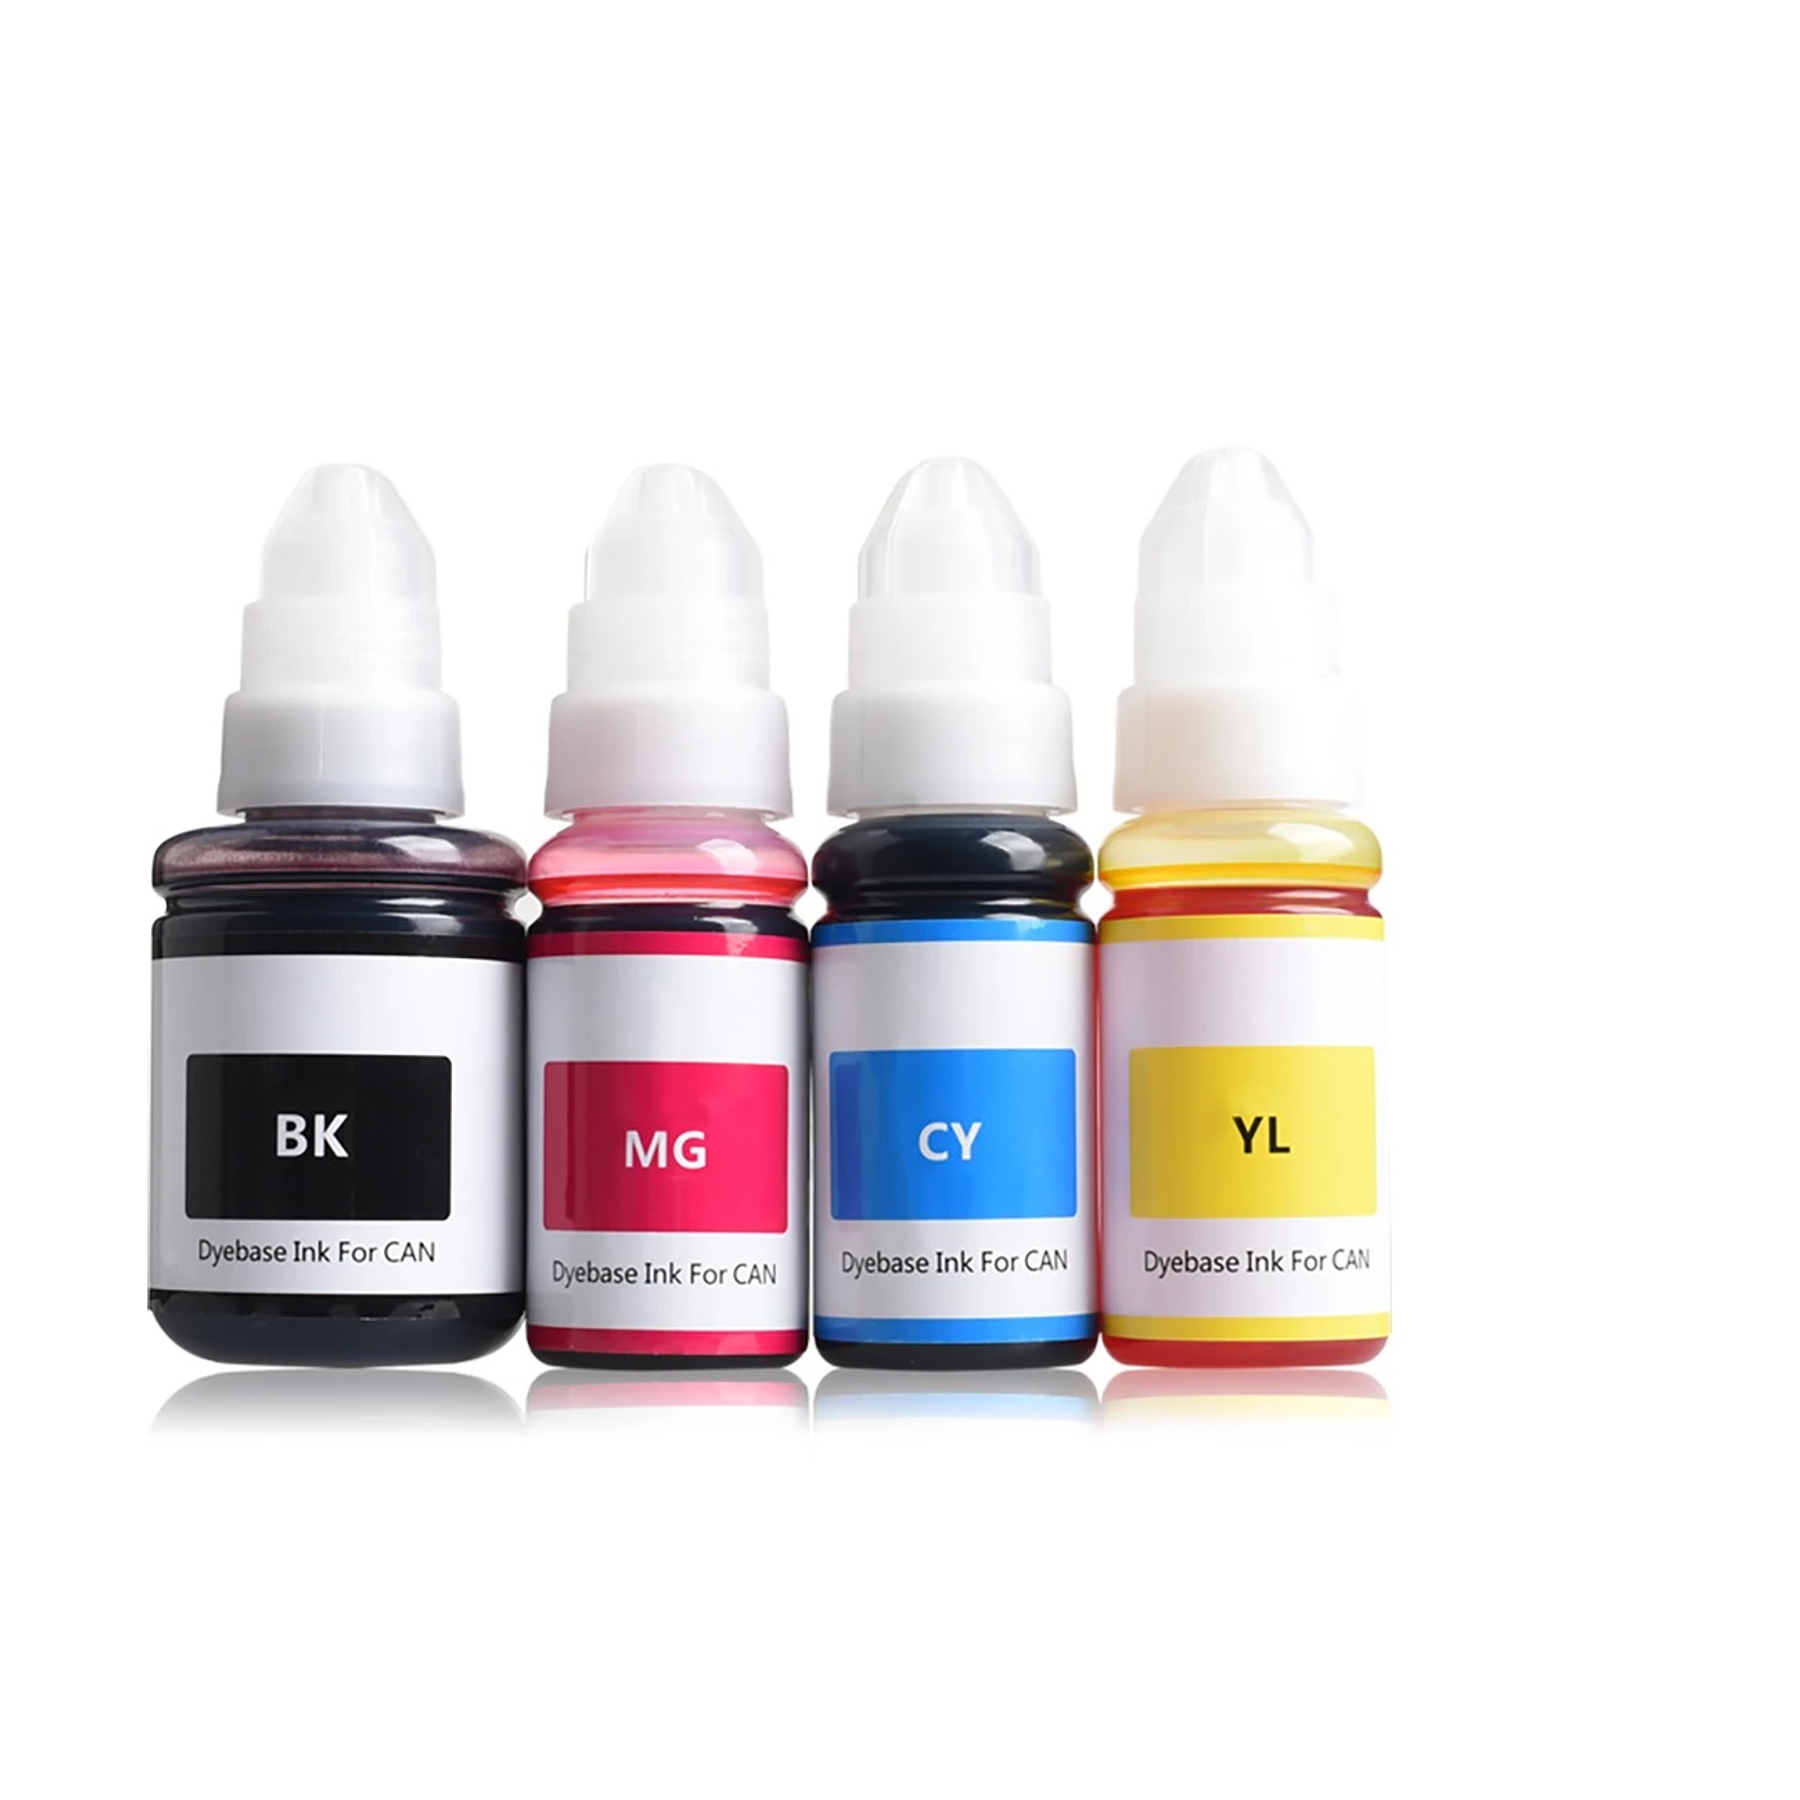 Tinta GI190 Pack 4 Colores Compatible con G2100 G2110 G31...